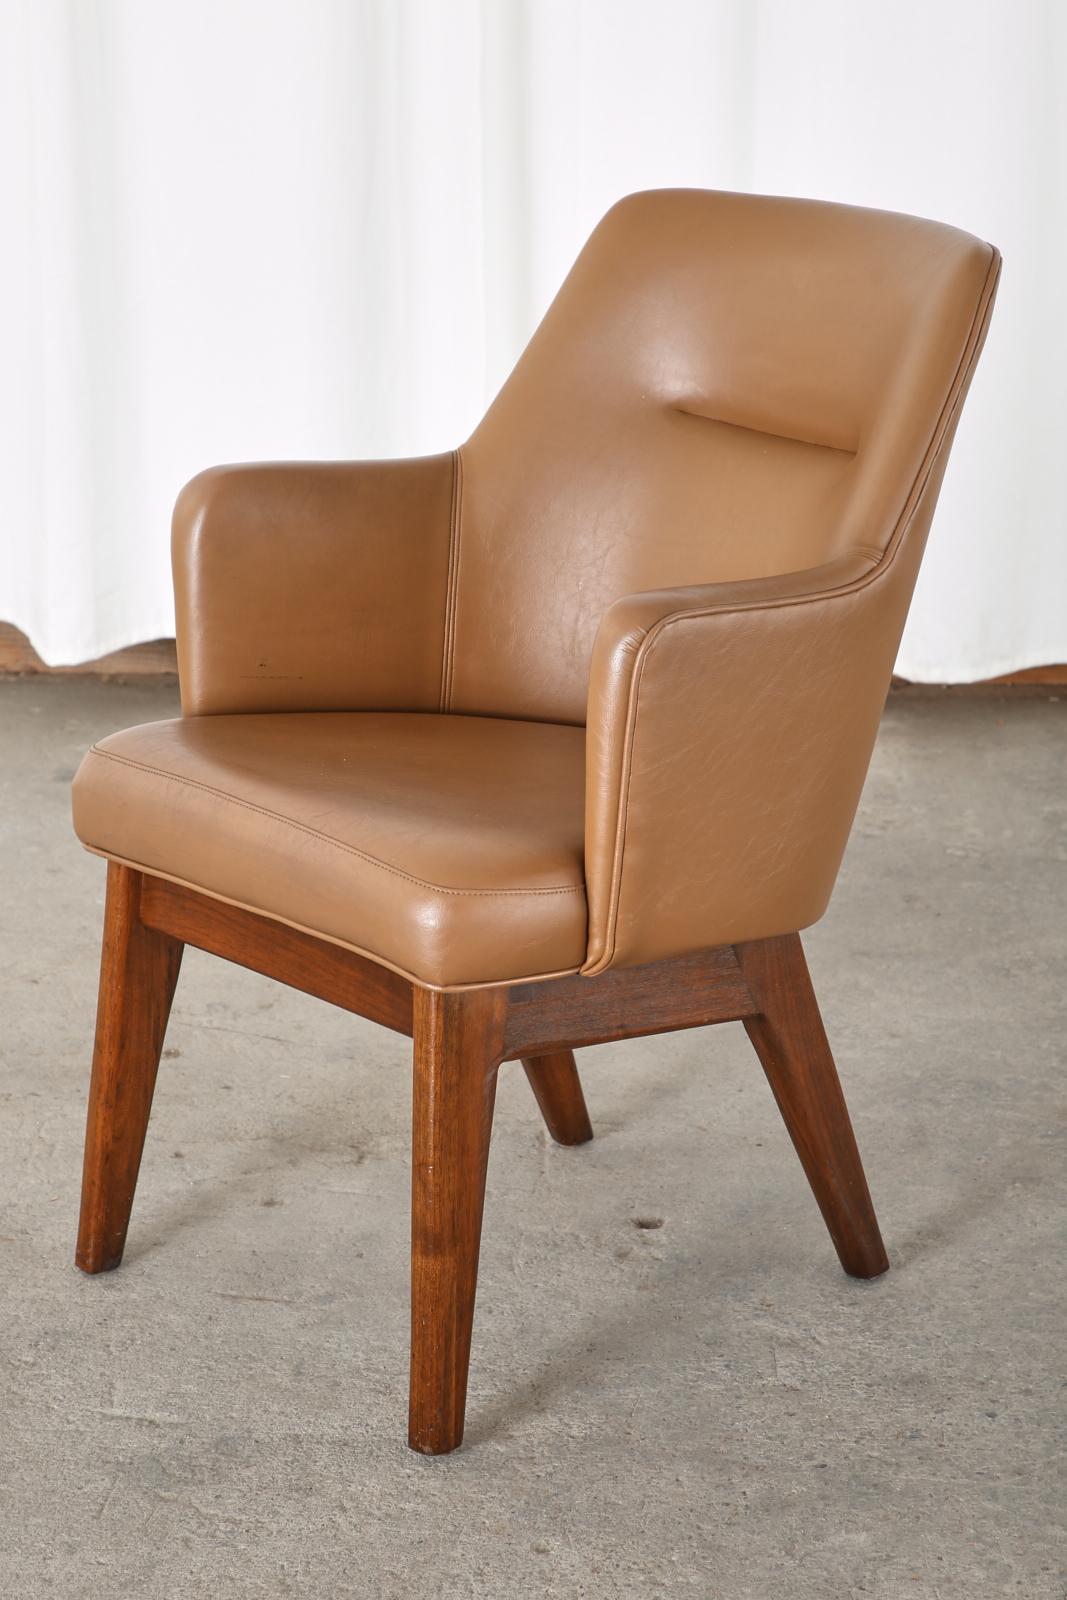 American Pair of Mid-Century Modern Style Walnut Lounge Chairs